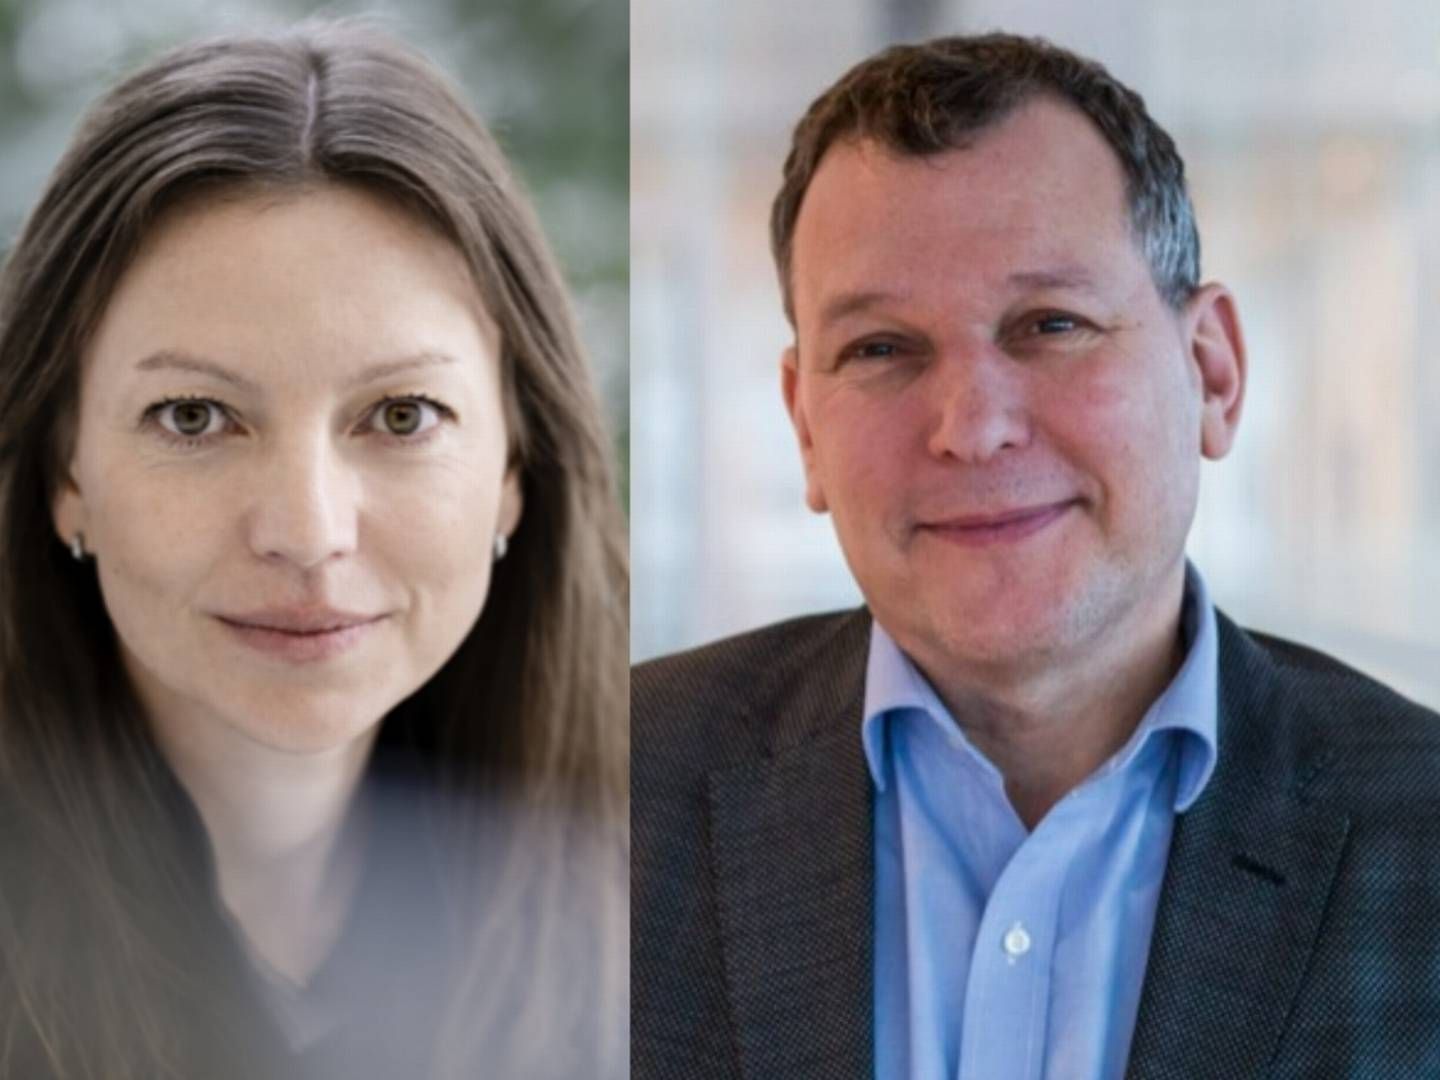 From left: Kirstine Lund Christiansen, Head of ESG at P+, Jan Kæraa Rasmussen, Head of ESG at PensionDanmark and Jens Munch Holst CEO of AkademikerPension. | Photo: PR/P+,PensionDanmark and AkademikerPension